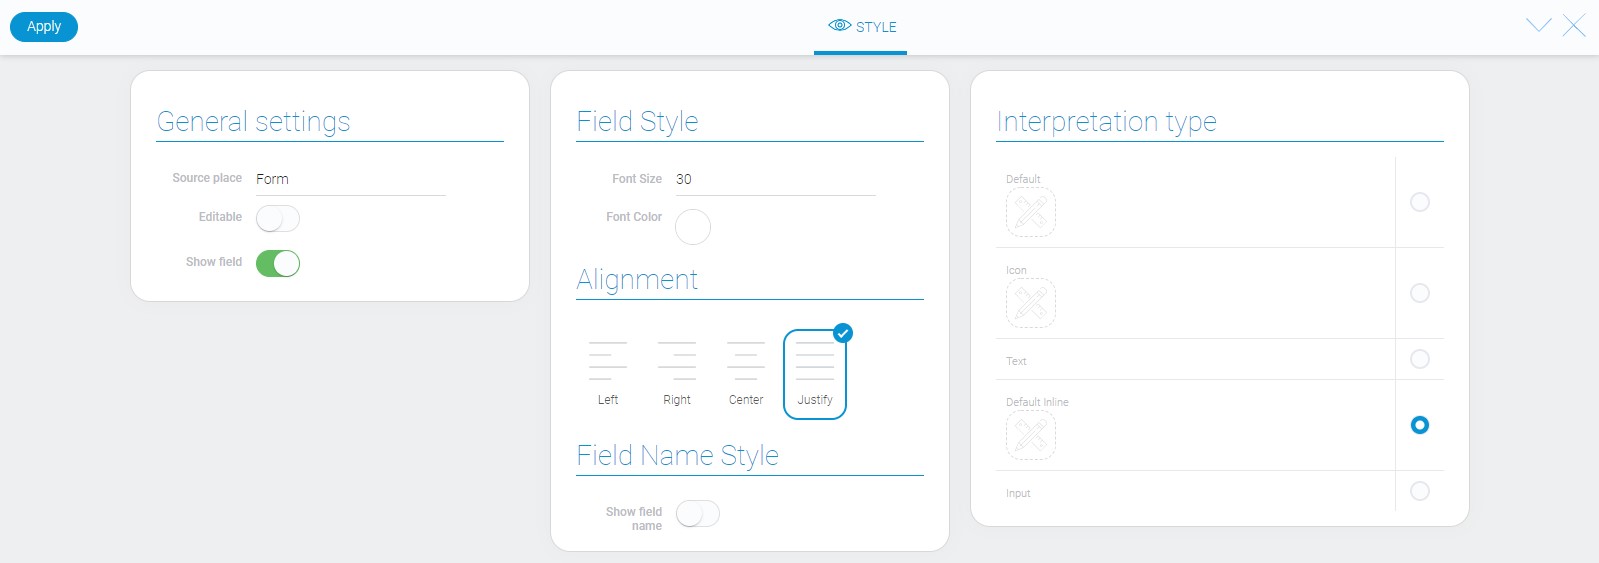 Style of app element